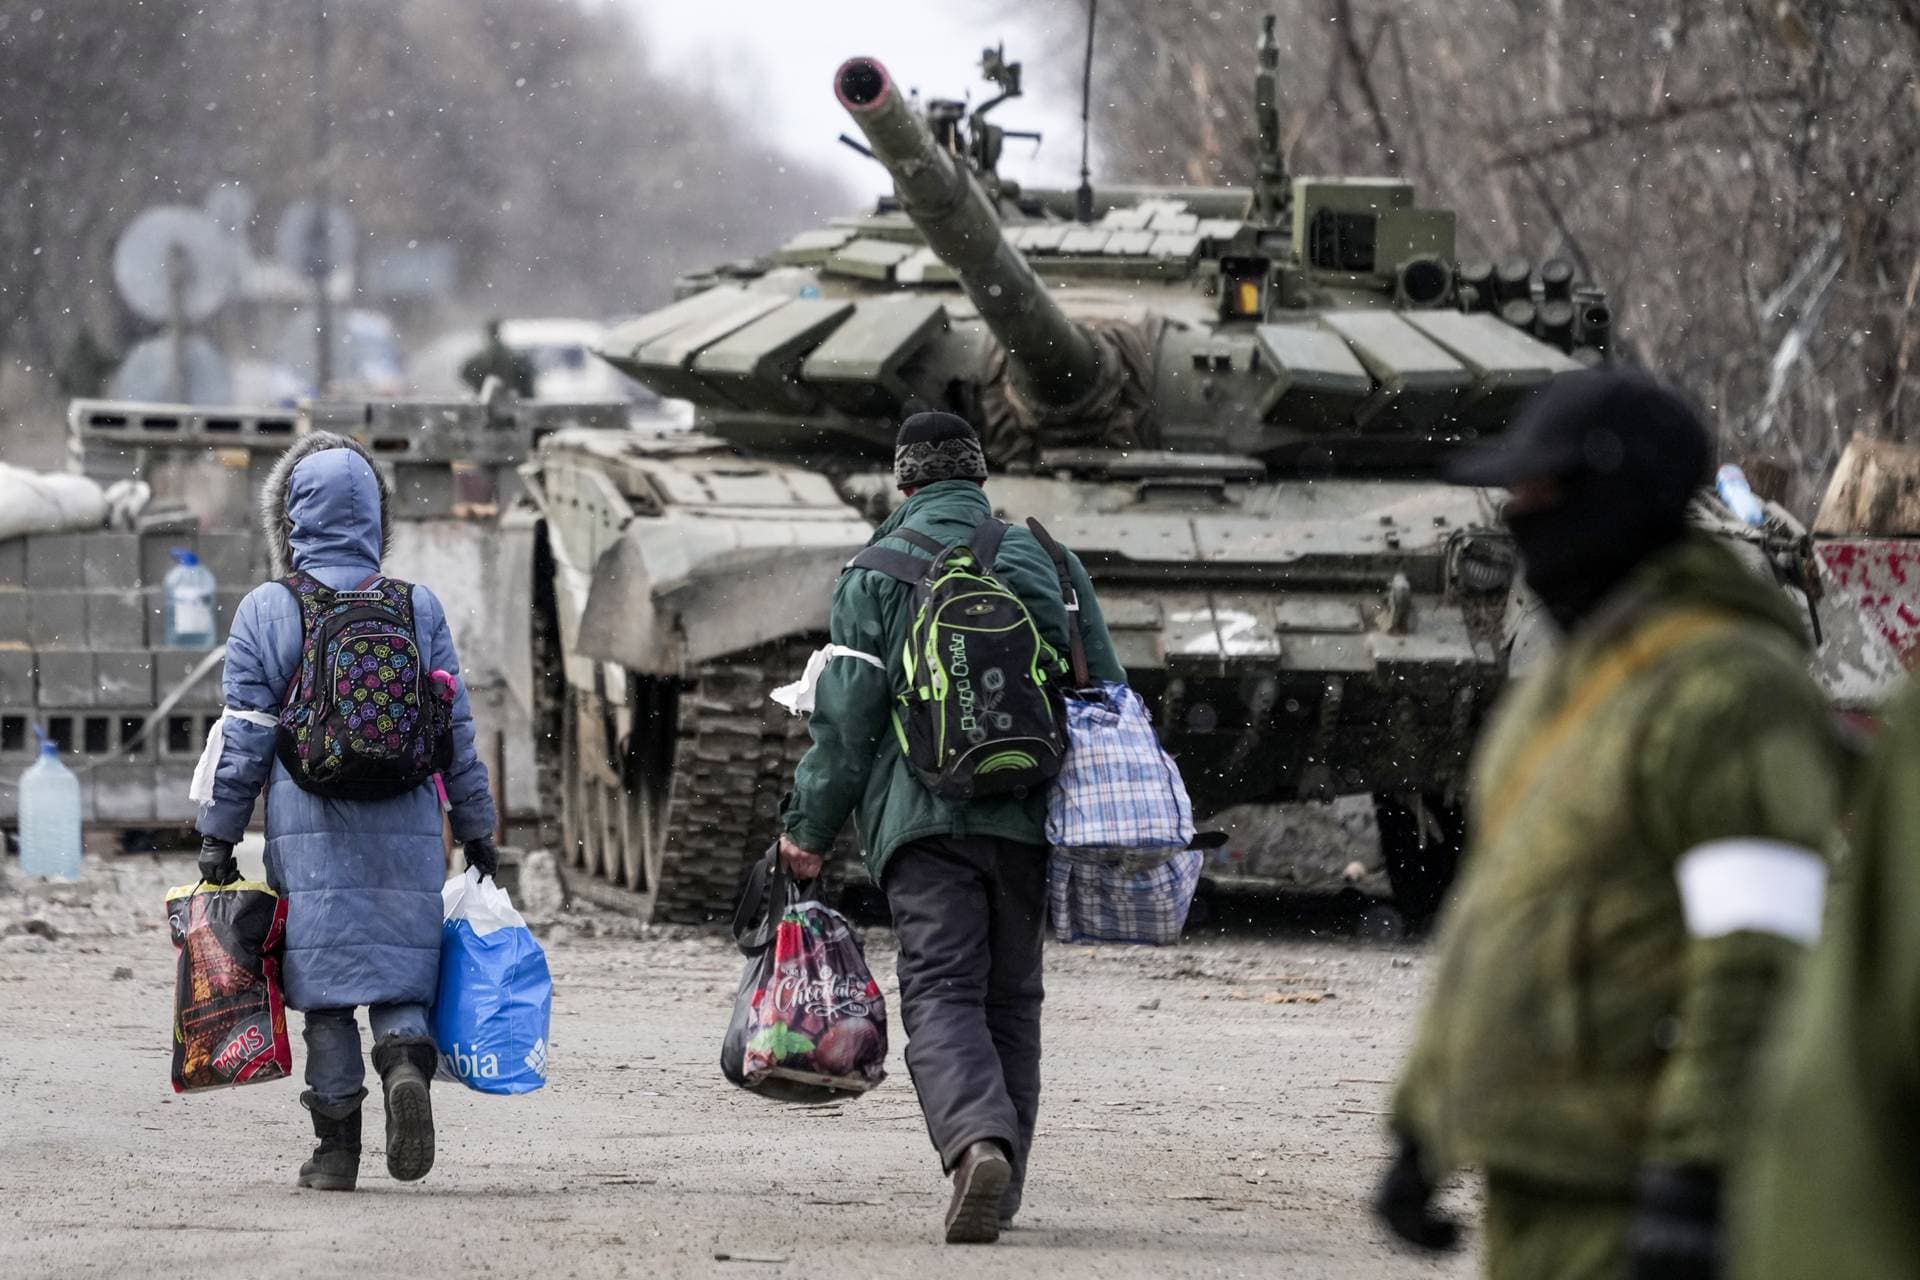 Mariupol has been the scene of some of the war's worst suffering